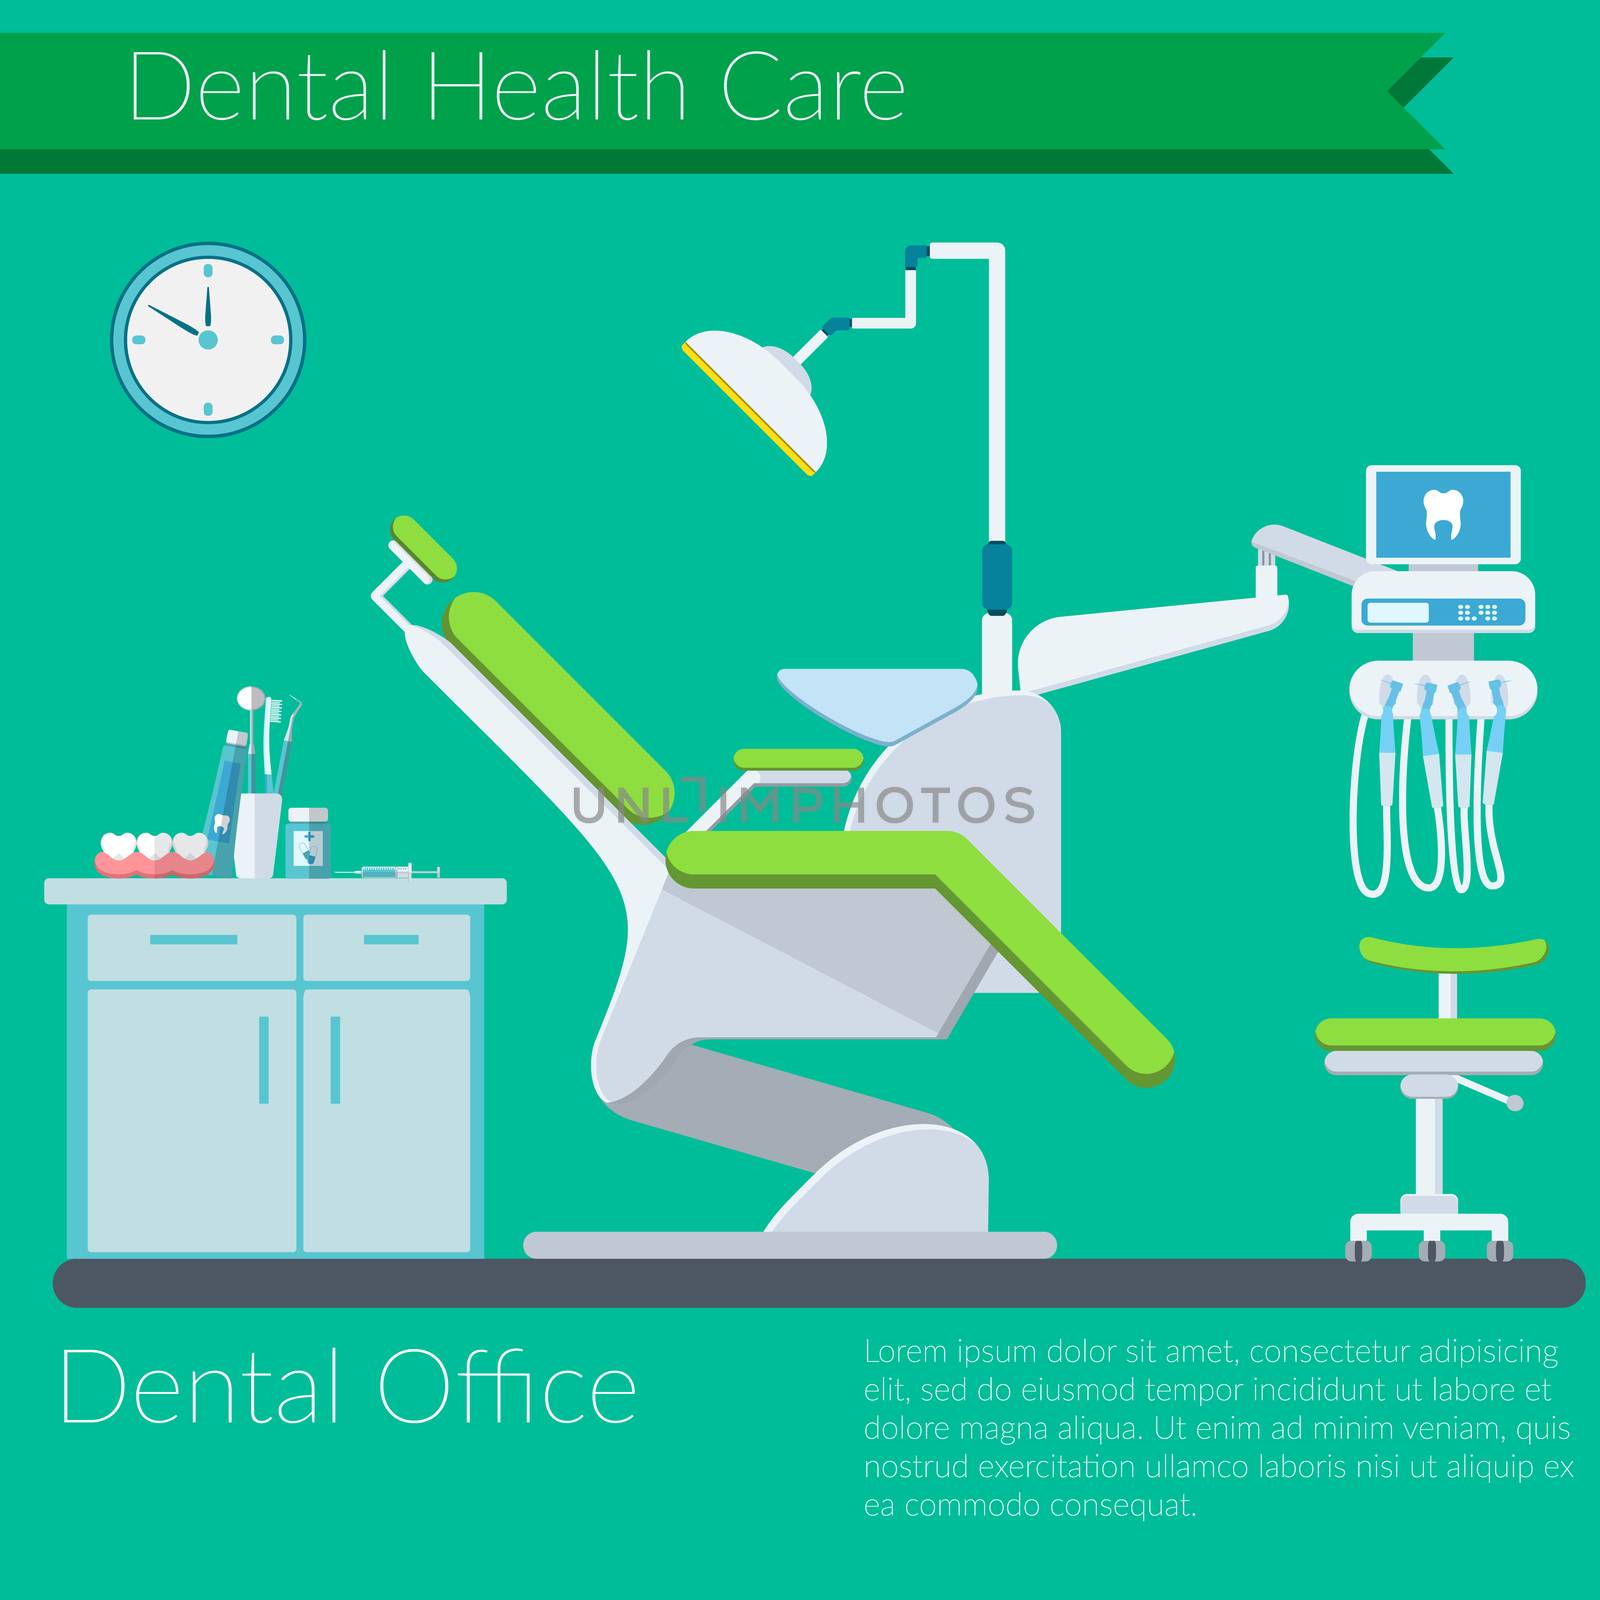 Dentist office flat design Vector illustration with Dental care items, teeth, tooth paste, brush, dentist chear on color background by Lemon_workshop